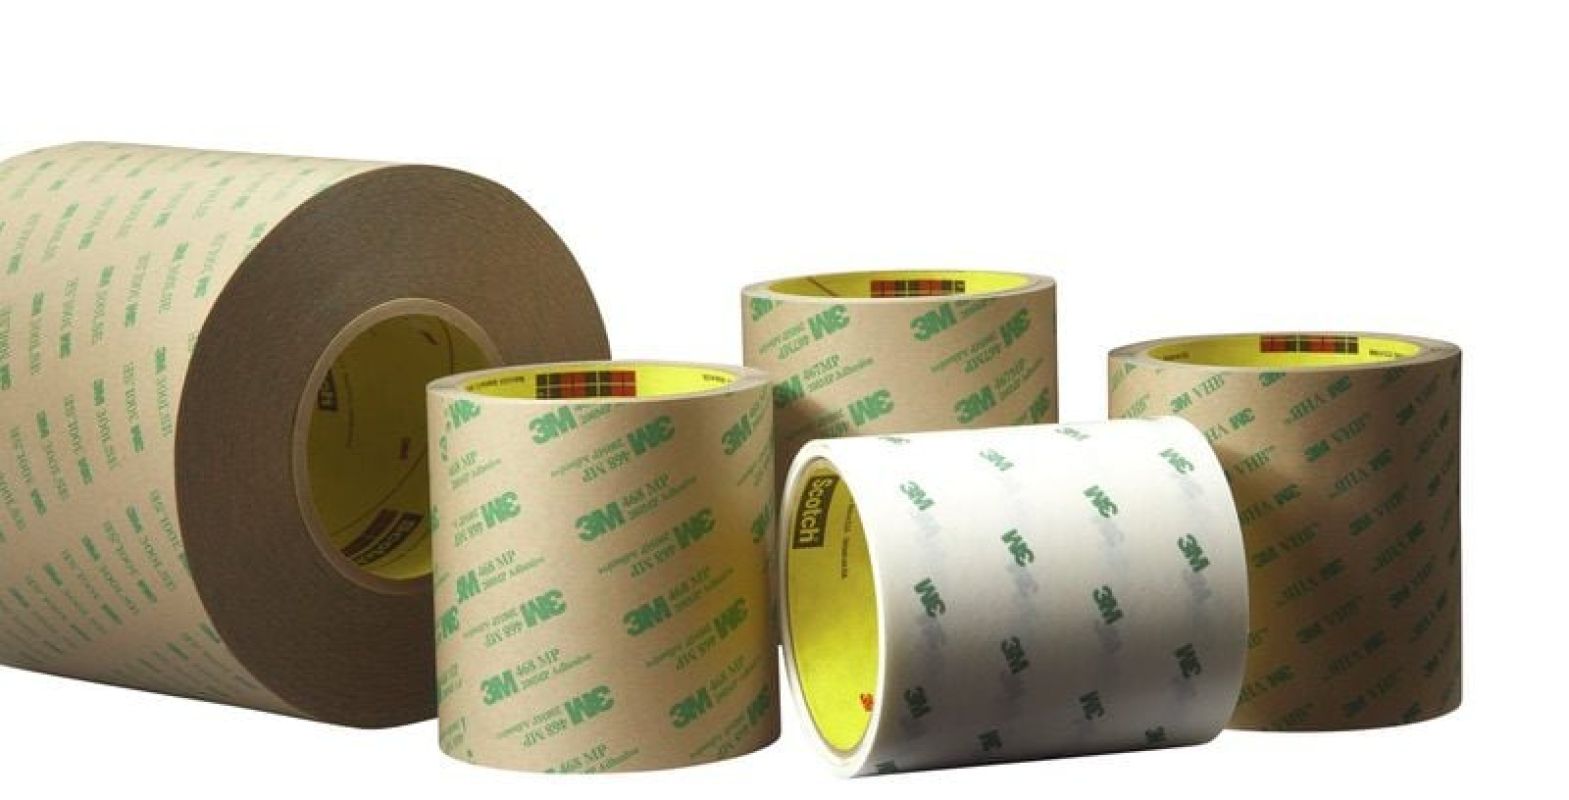 3M™ Adhesive Transfer Tape Double Linered 8153LE, Transparent, 610 mm x 914 mm, 0.09 mm